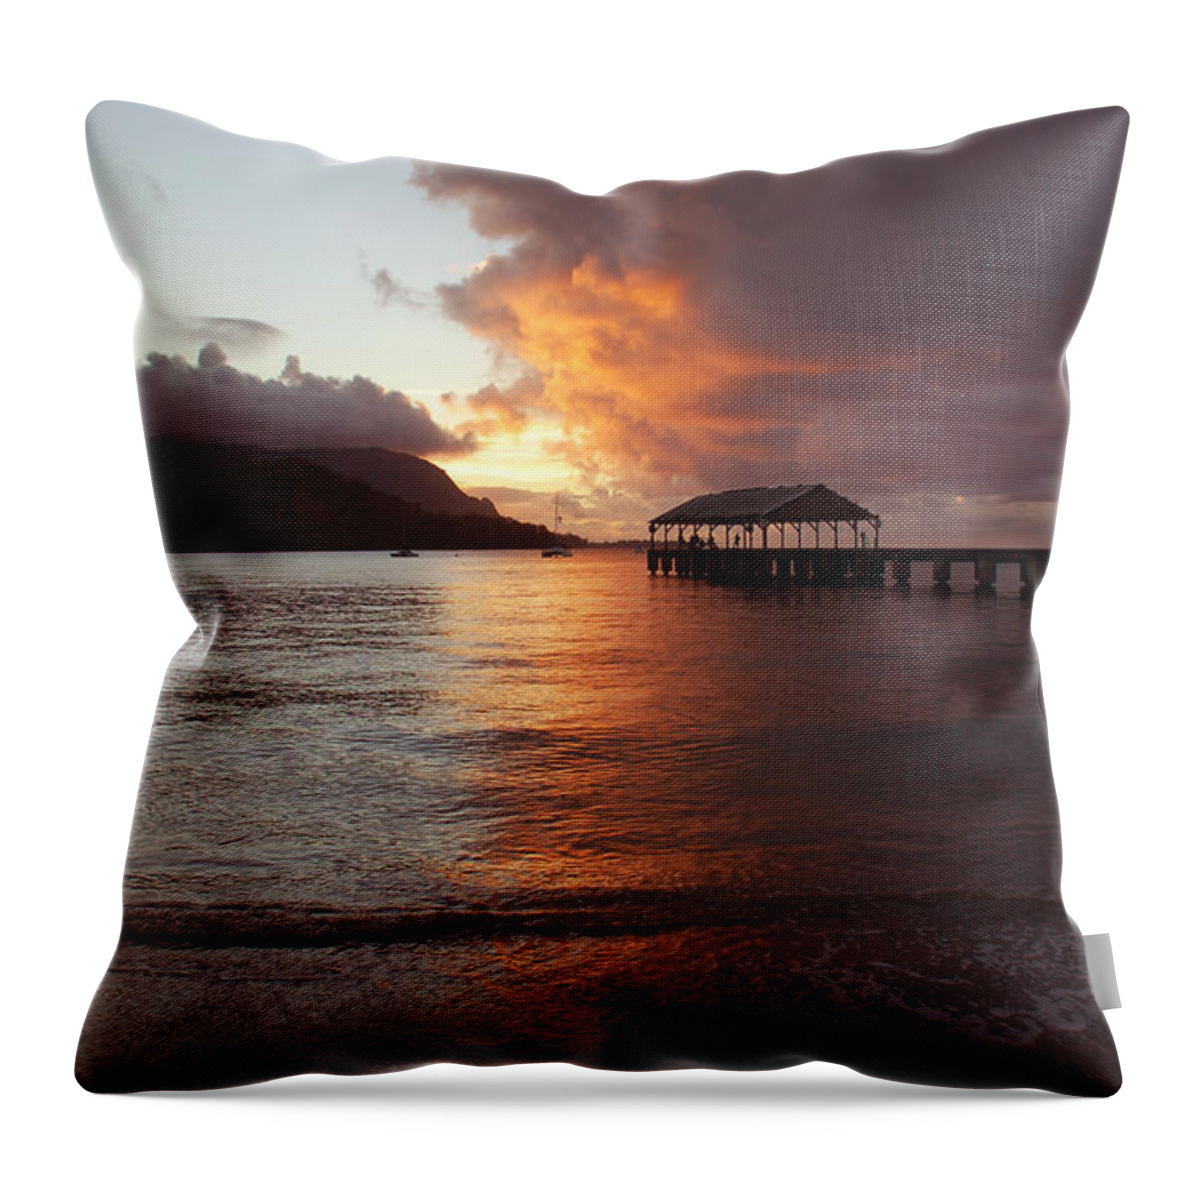 Hanalei Bay Throw Pillow featuring the photograph Hanalei Sunset by Kelly Wade